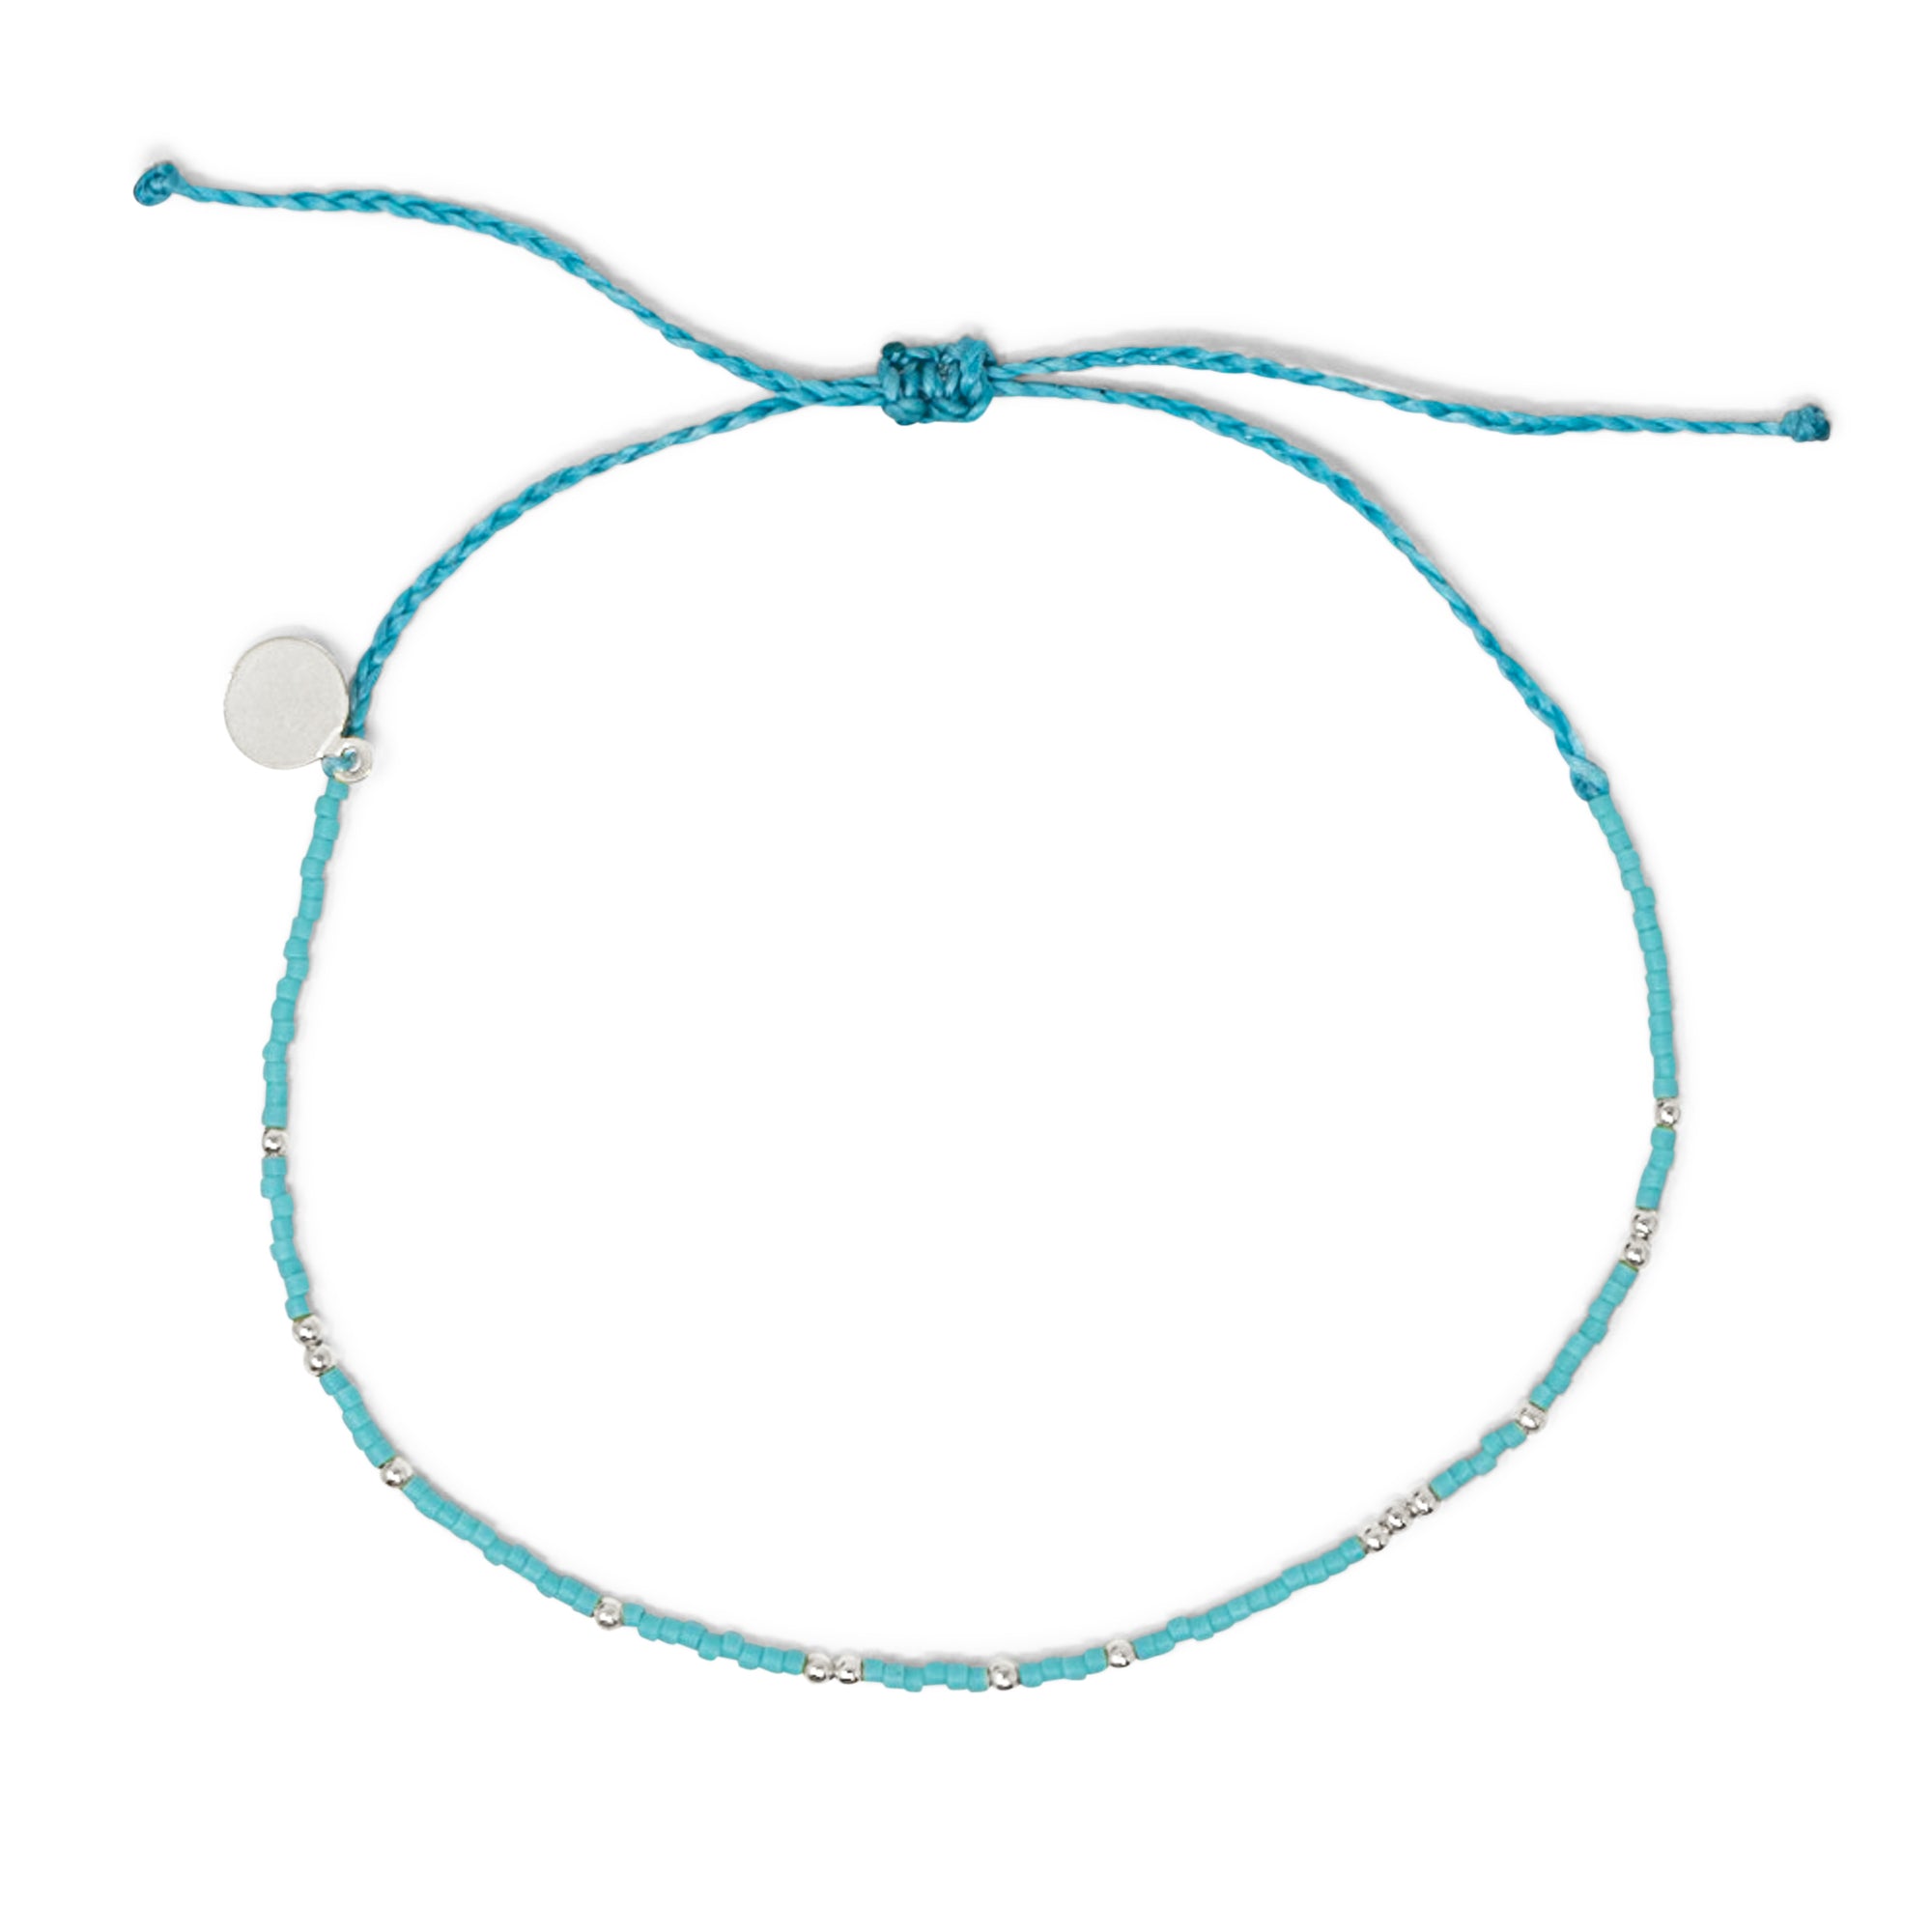 Teal & Silver Bead Anklet